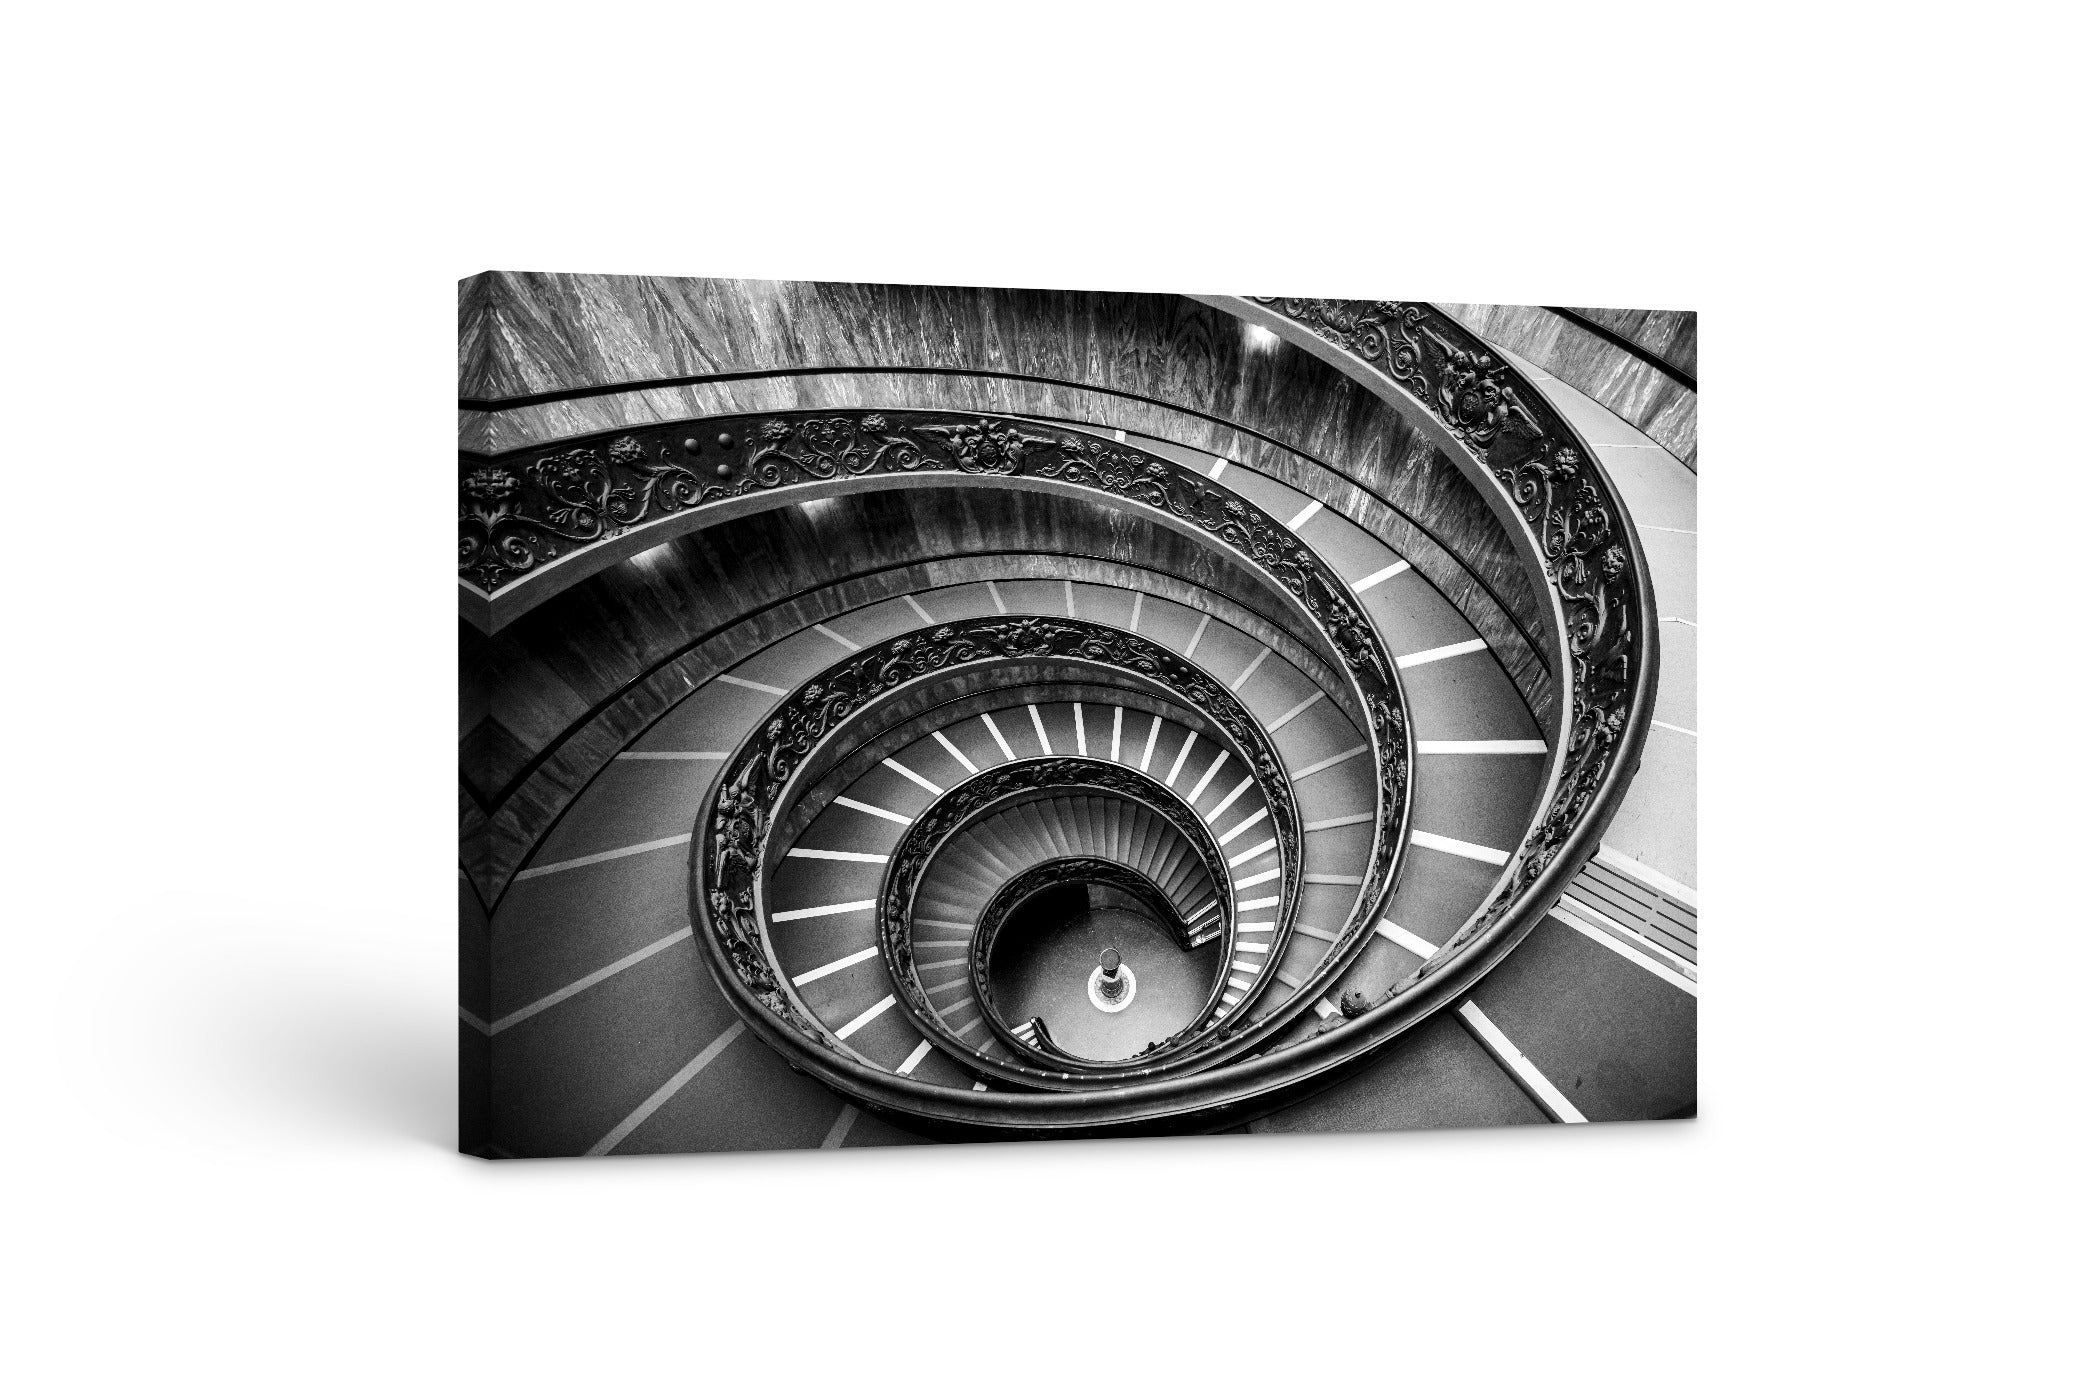 Vatican Staircase 24x36"